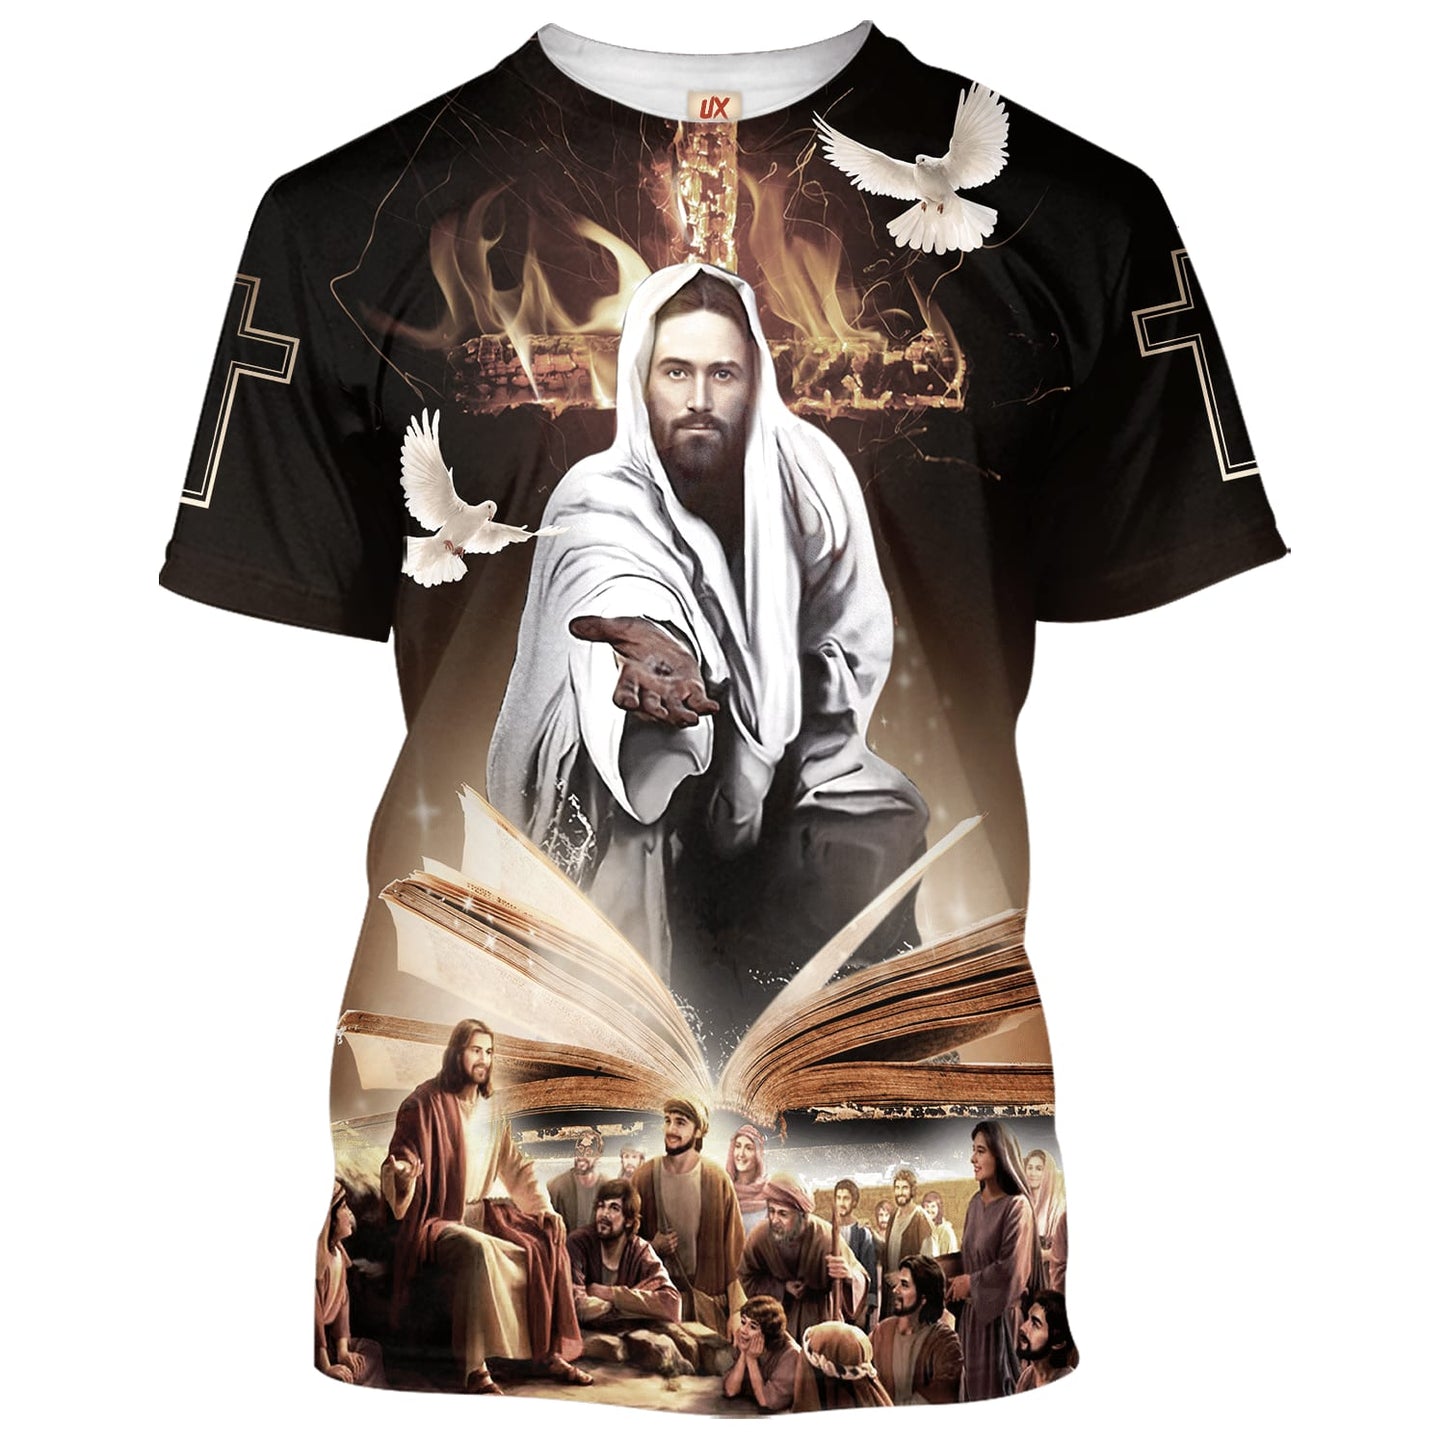 Jesus With His Disciples 3d Shirts - Christian T Shirts For Men And Women